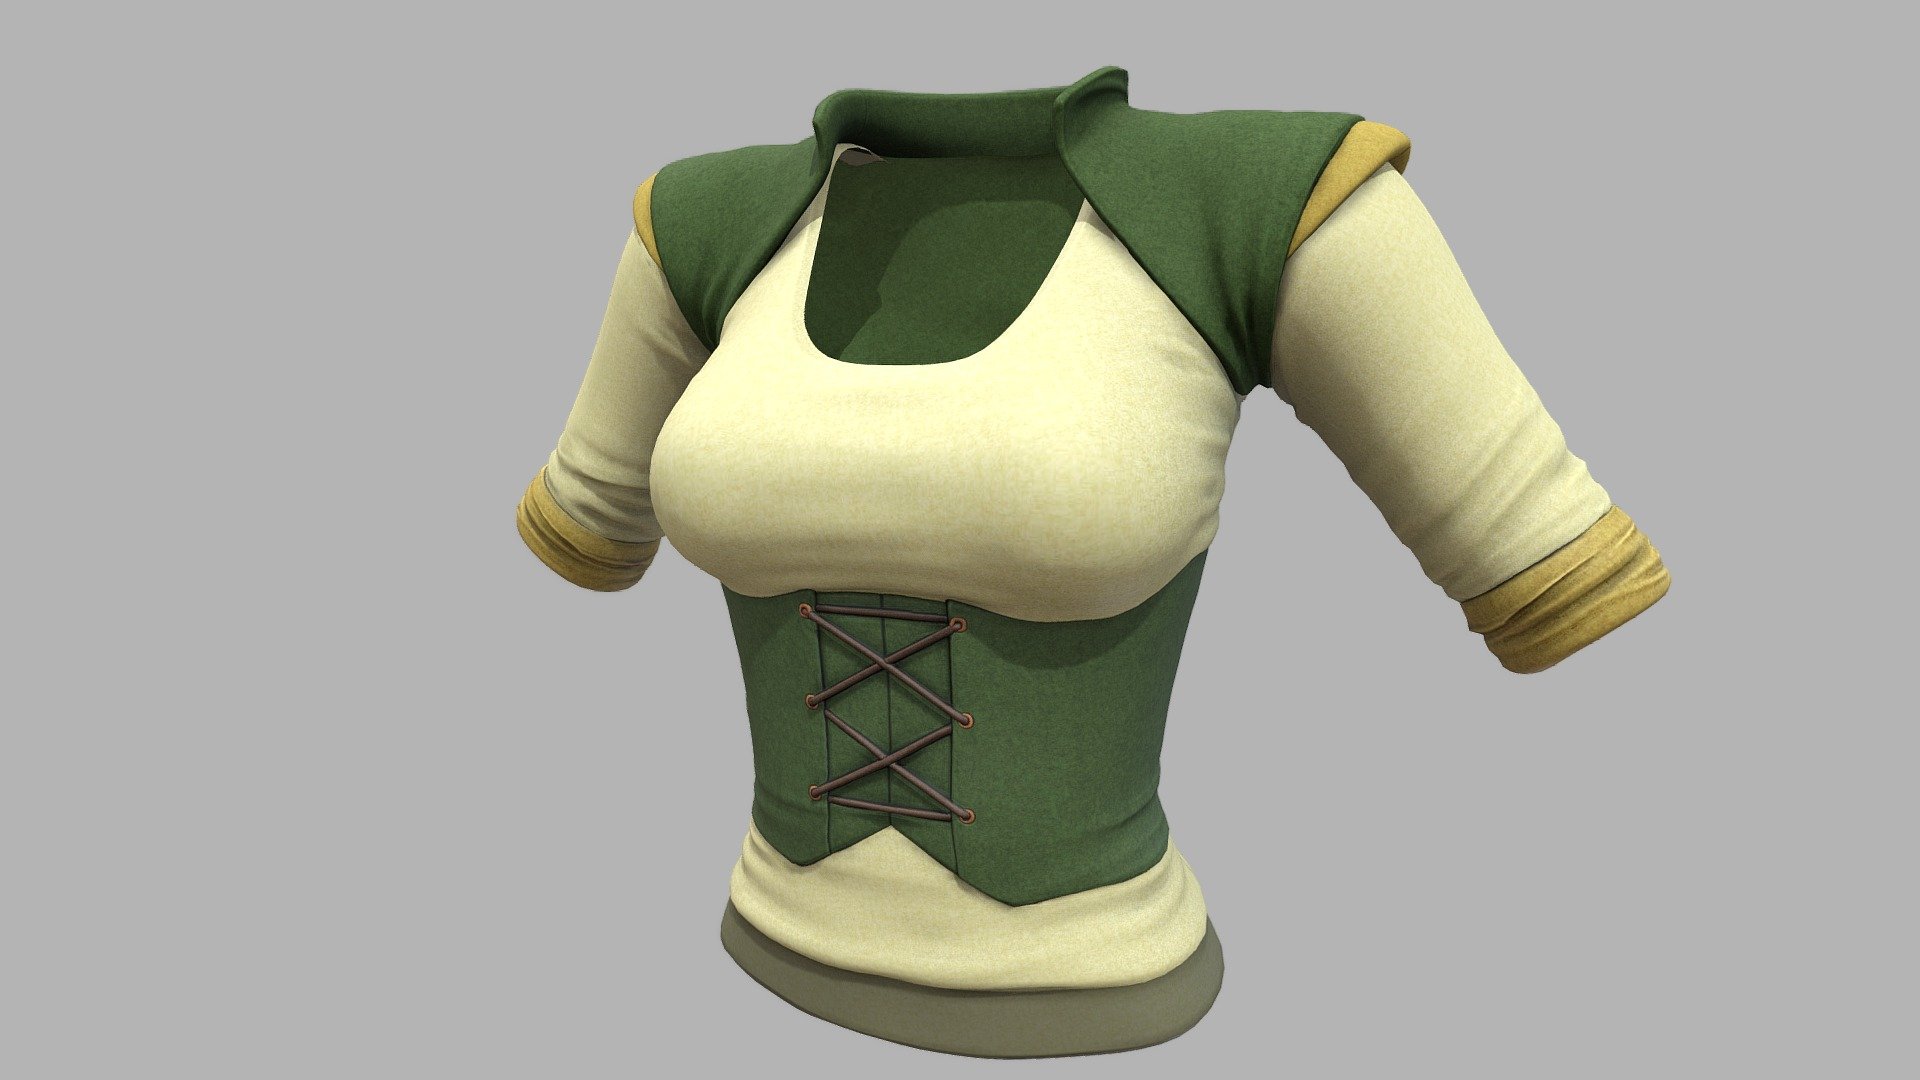 Women's Medieval Steampunk Peasant Bolero Shrug

Can be fitted to any character

Clean topology

No overlapping smart optimized unwrapped UVs

High-quality realistic textures

FBX, OBJ, gITF, USDZ (request other formats)

PBR or Classic

Type     user:3dia &ldquo;search term